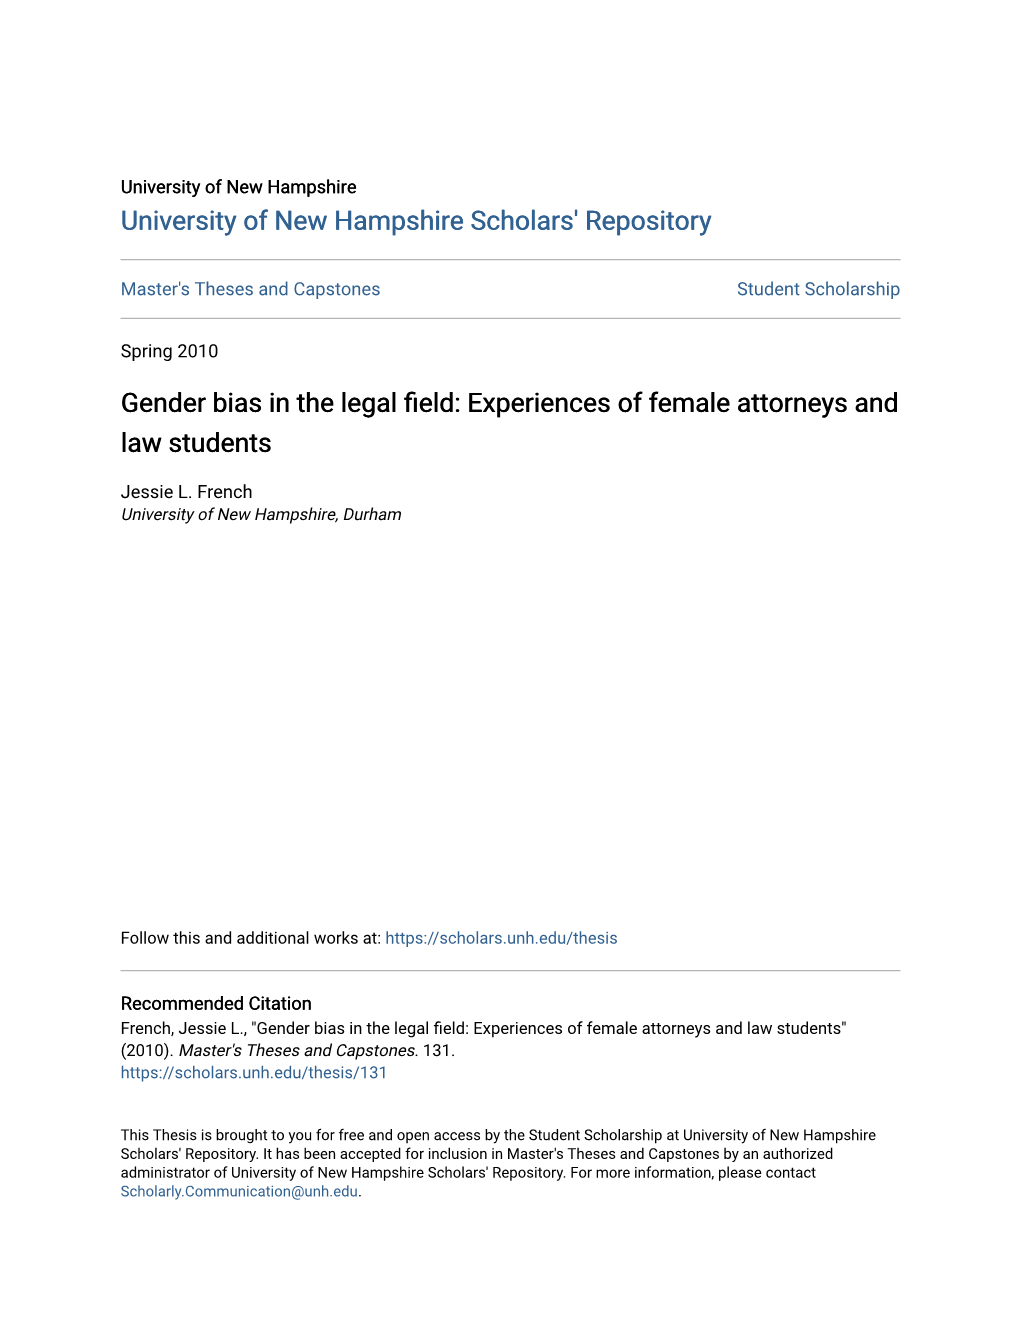 Gender Bias in the Legal Field: Experiences of Female Attorneys and Law Students